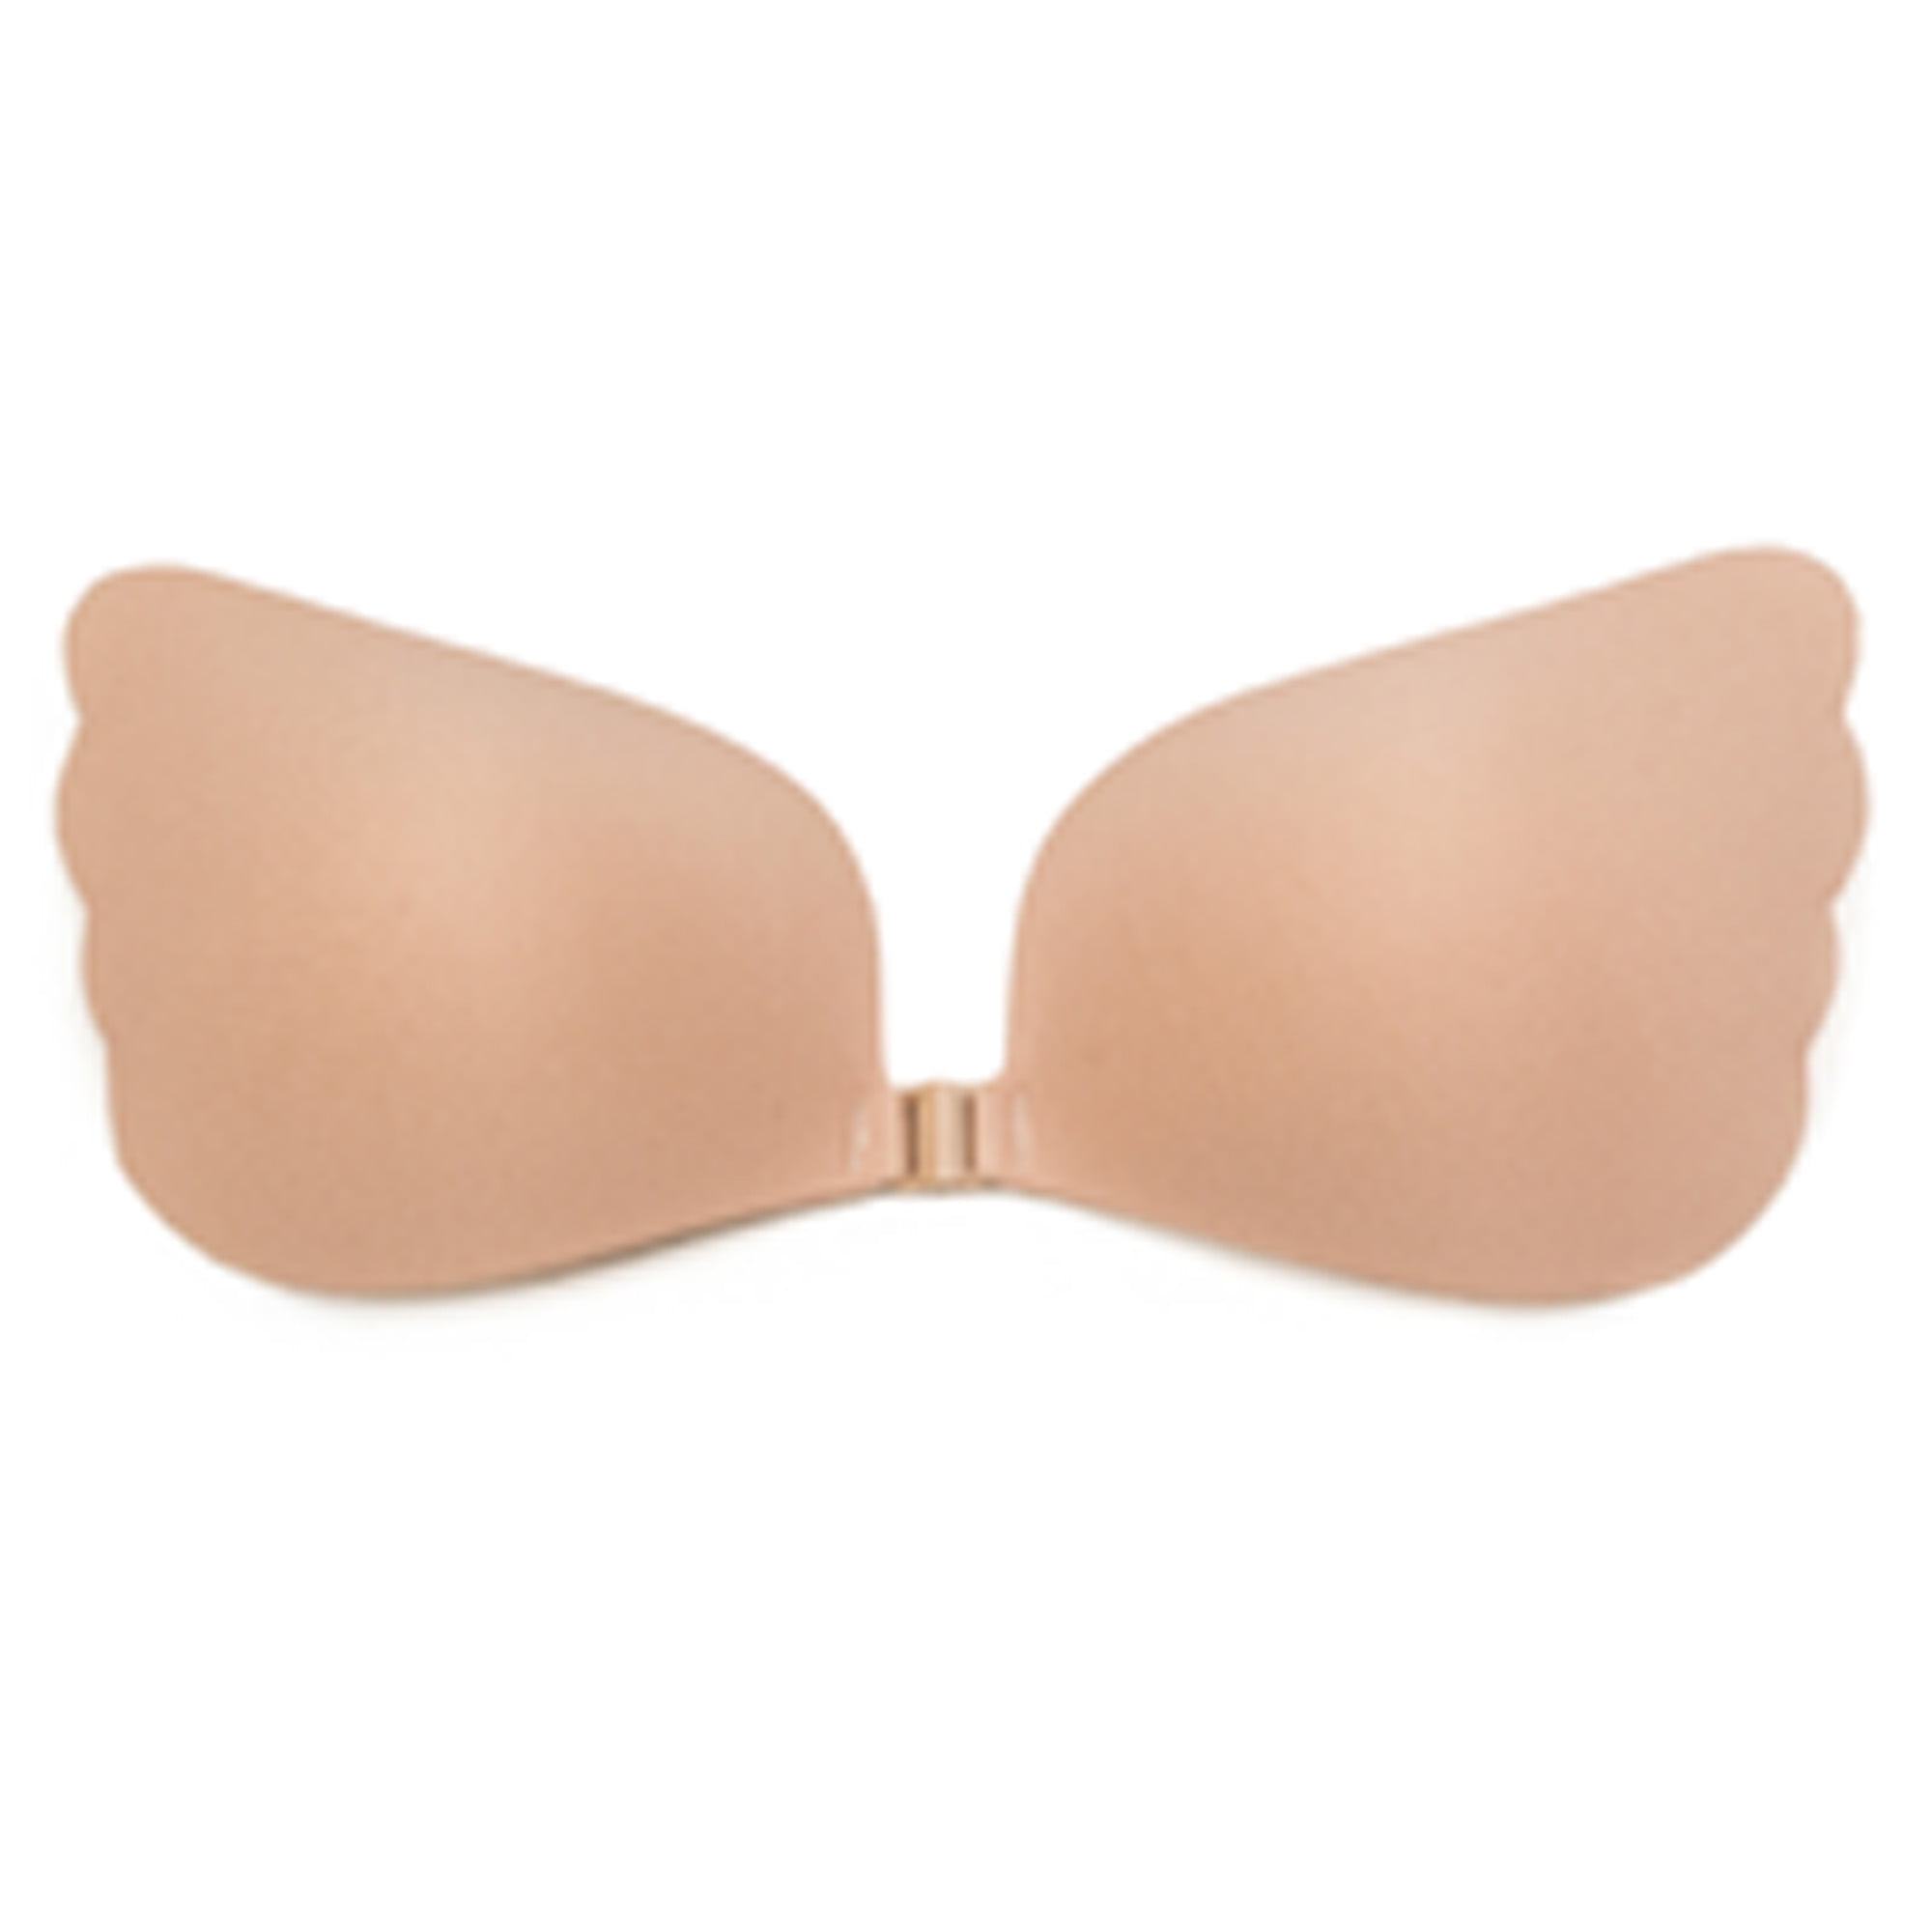 LELINTA Backless Strapless Bra Self Adhesive Bilicone Invisible